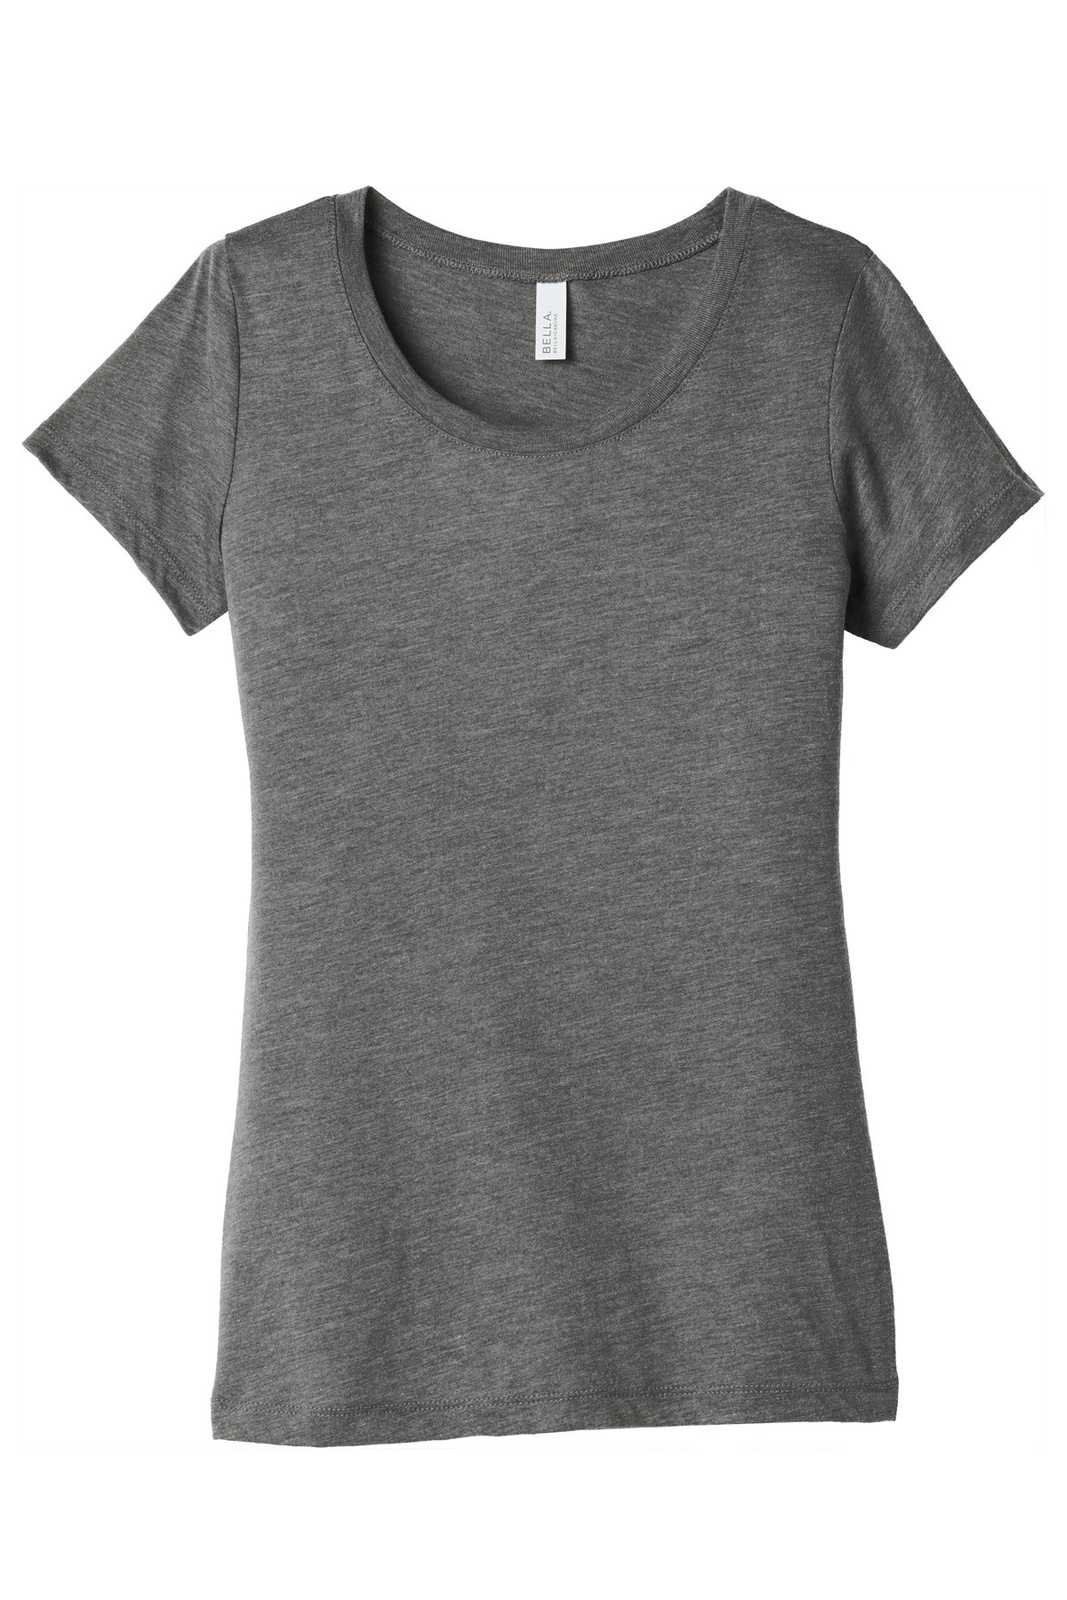 Bella + Canvas 8413 Women's Triblend Short Sleeve Tee - Gray Triblend - HIT a Double